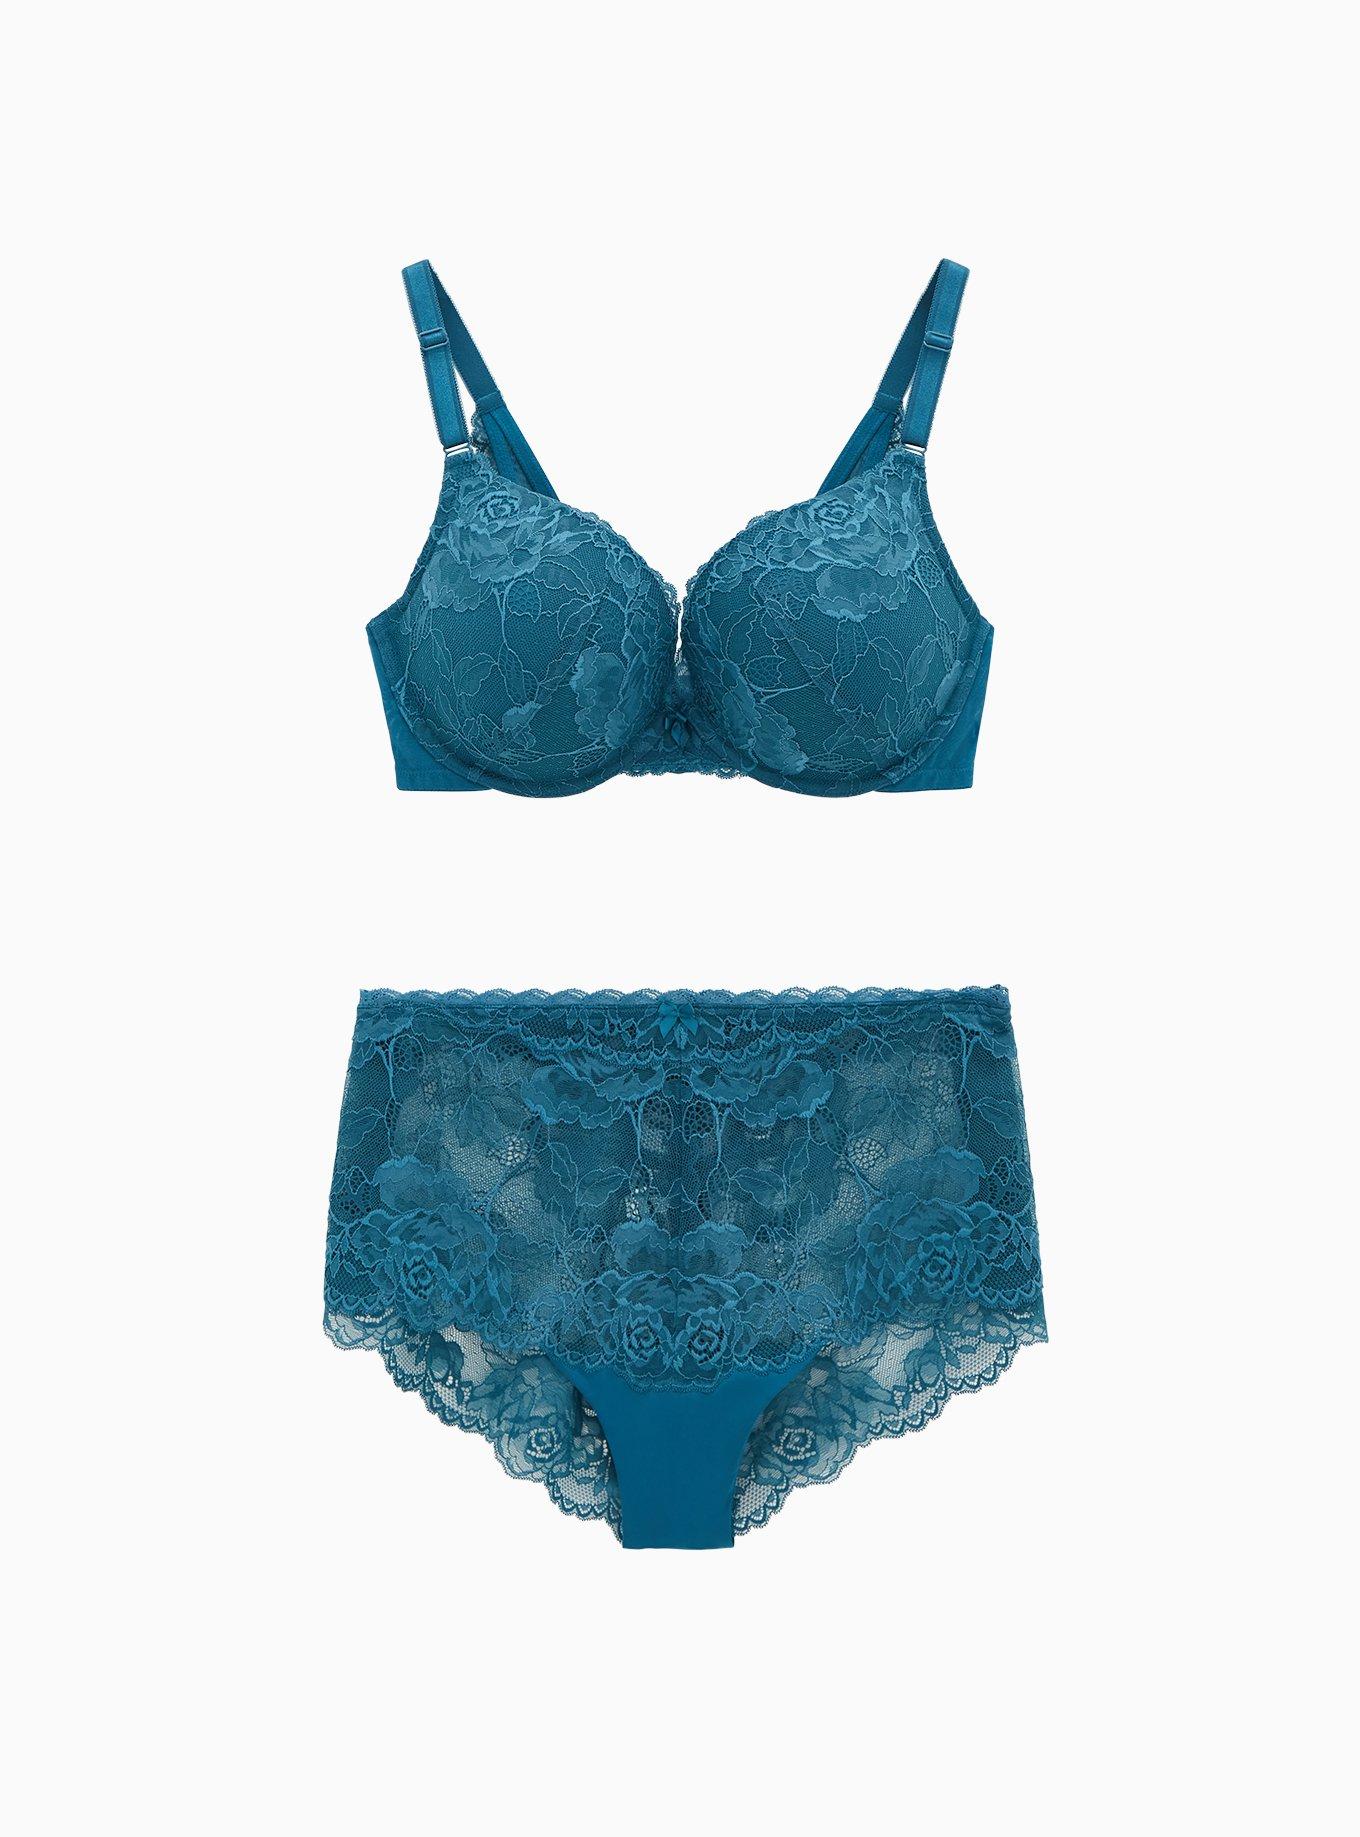 NWT TORRID $48 Teal Blue Chunky Lace Push Up Plunge Bra Size 36D